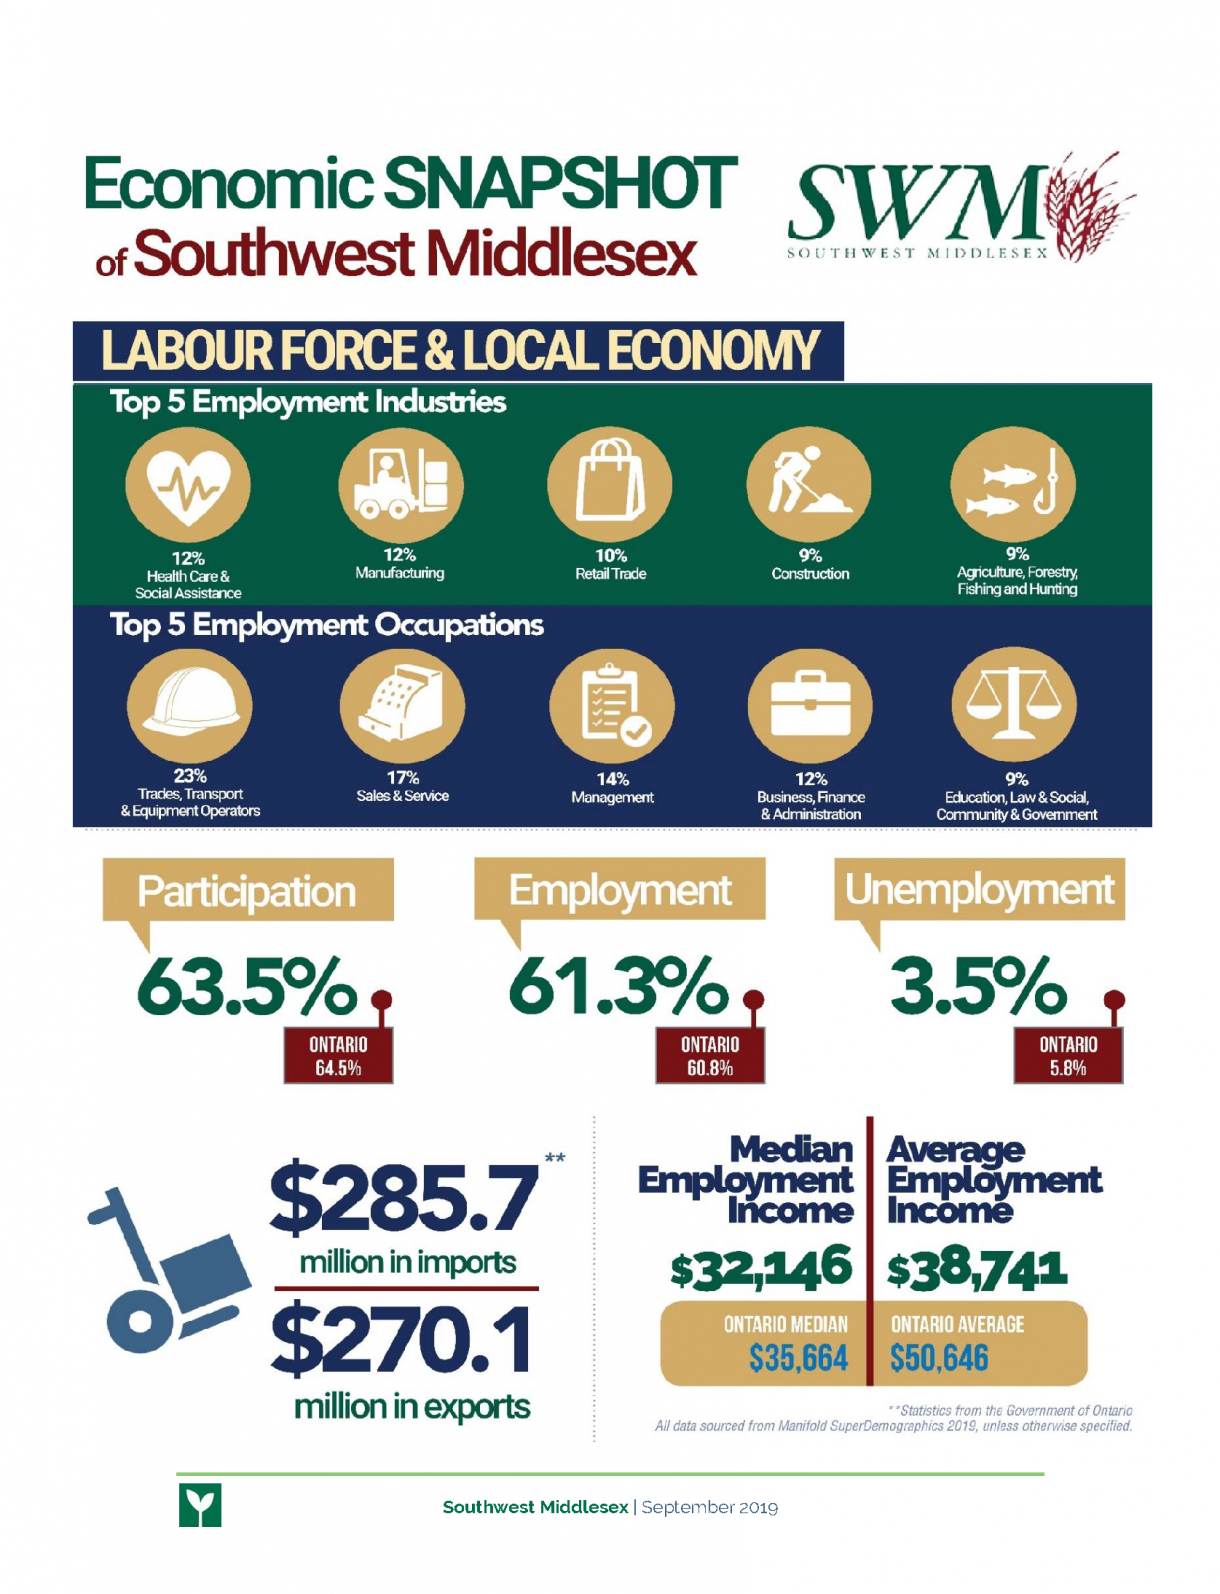 Economic Snapshot - Labour Force and Local Economy in SWM